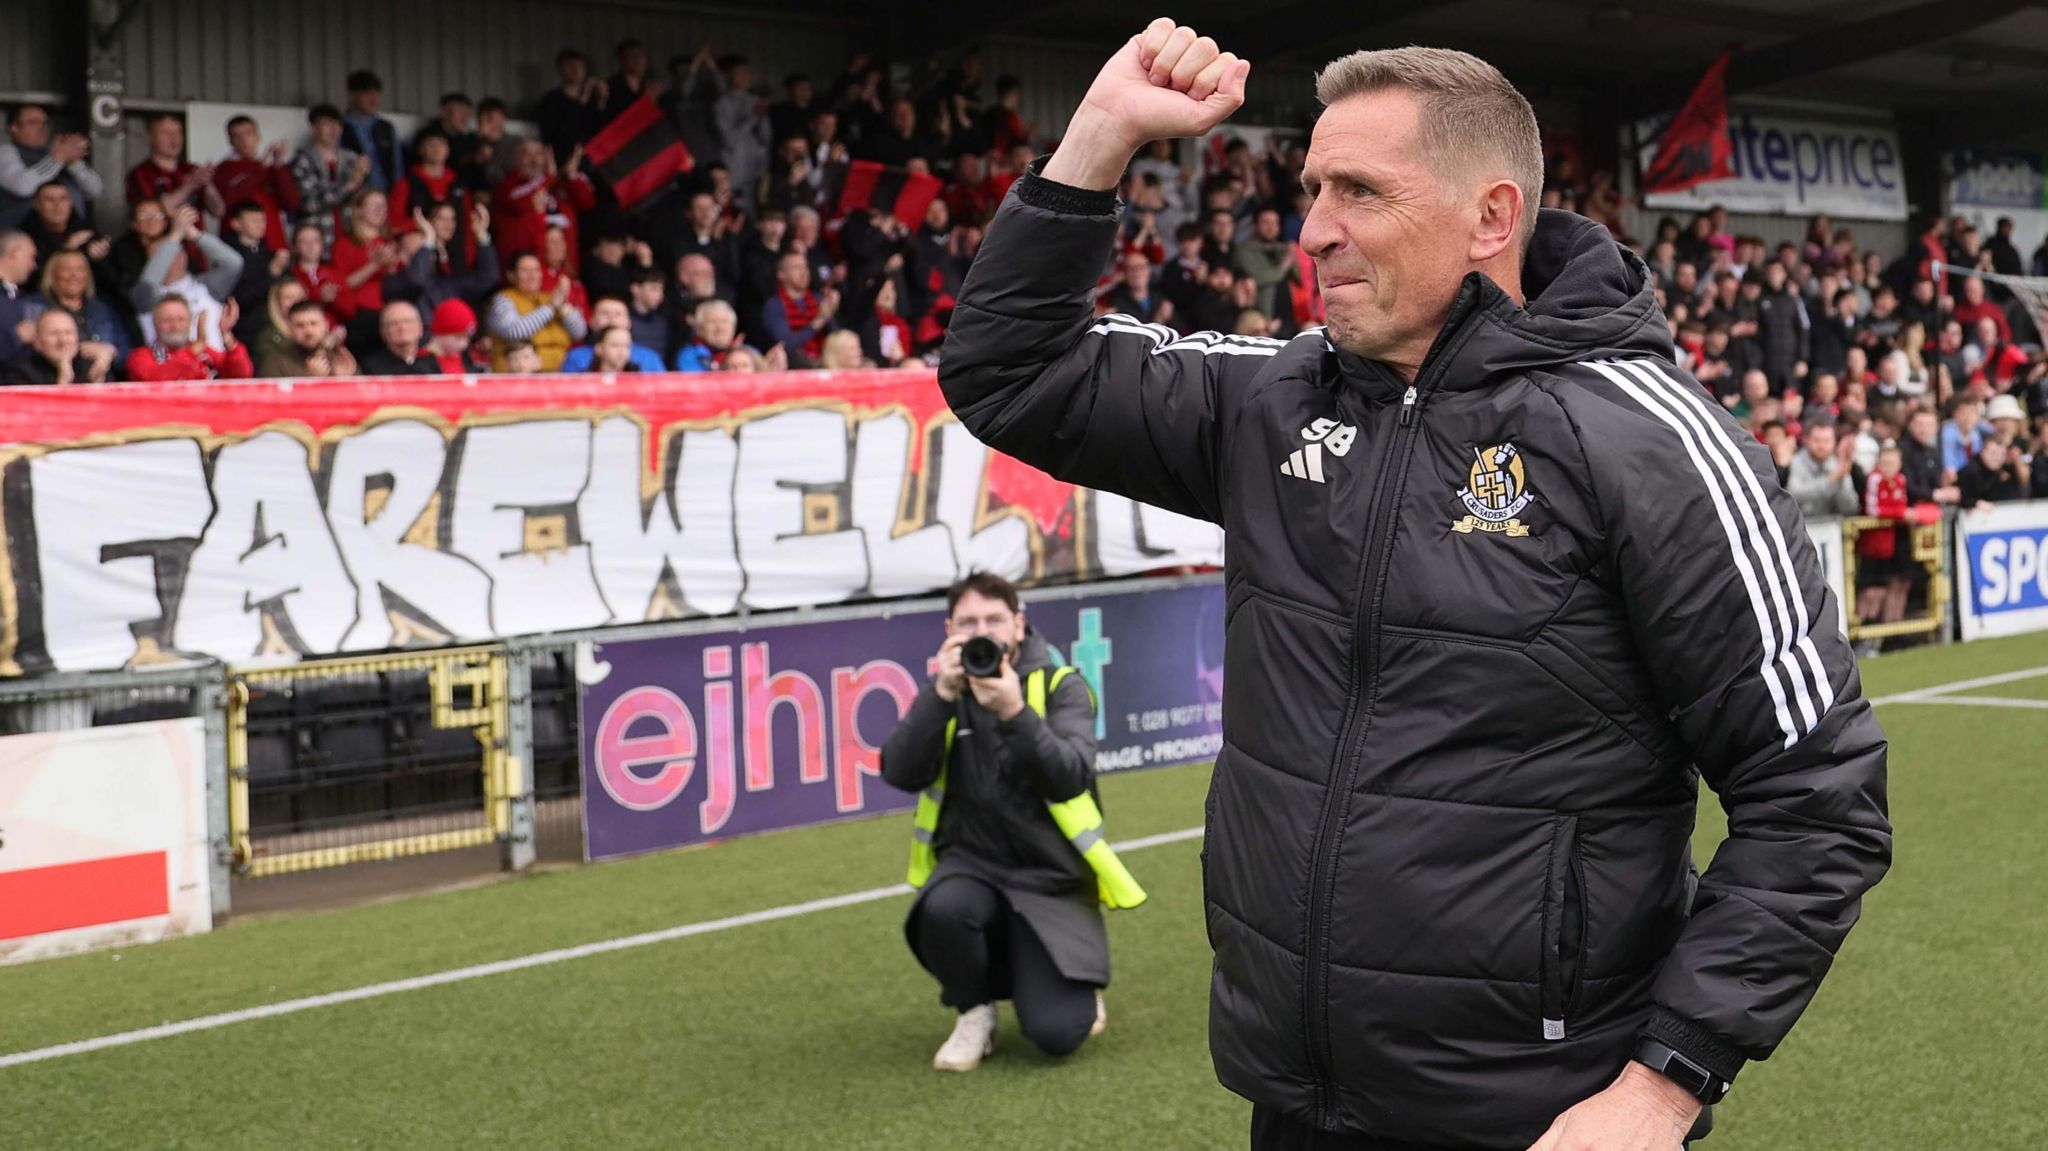 Stephen Baxter waves farewell to the Crusaders supporters at Seaview